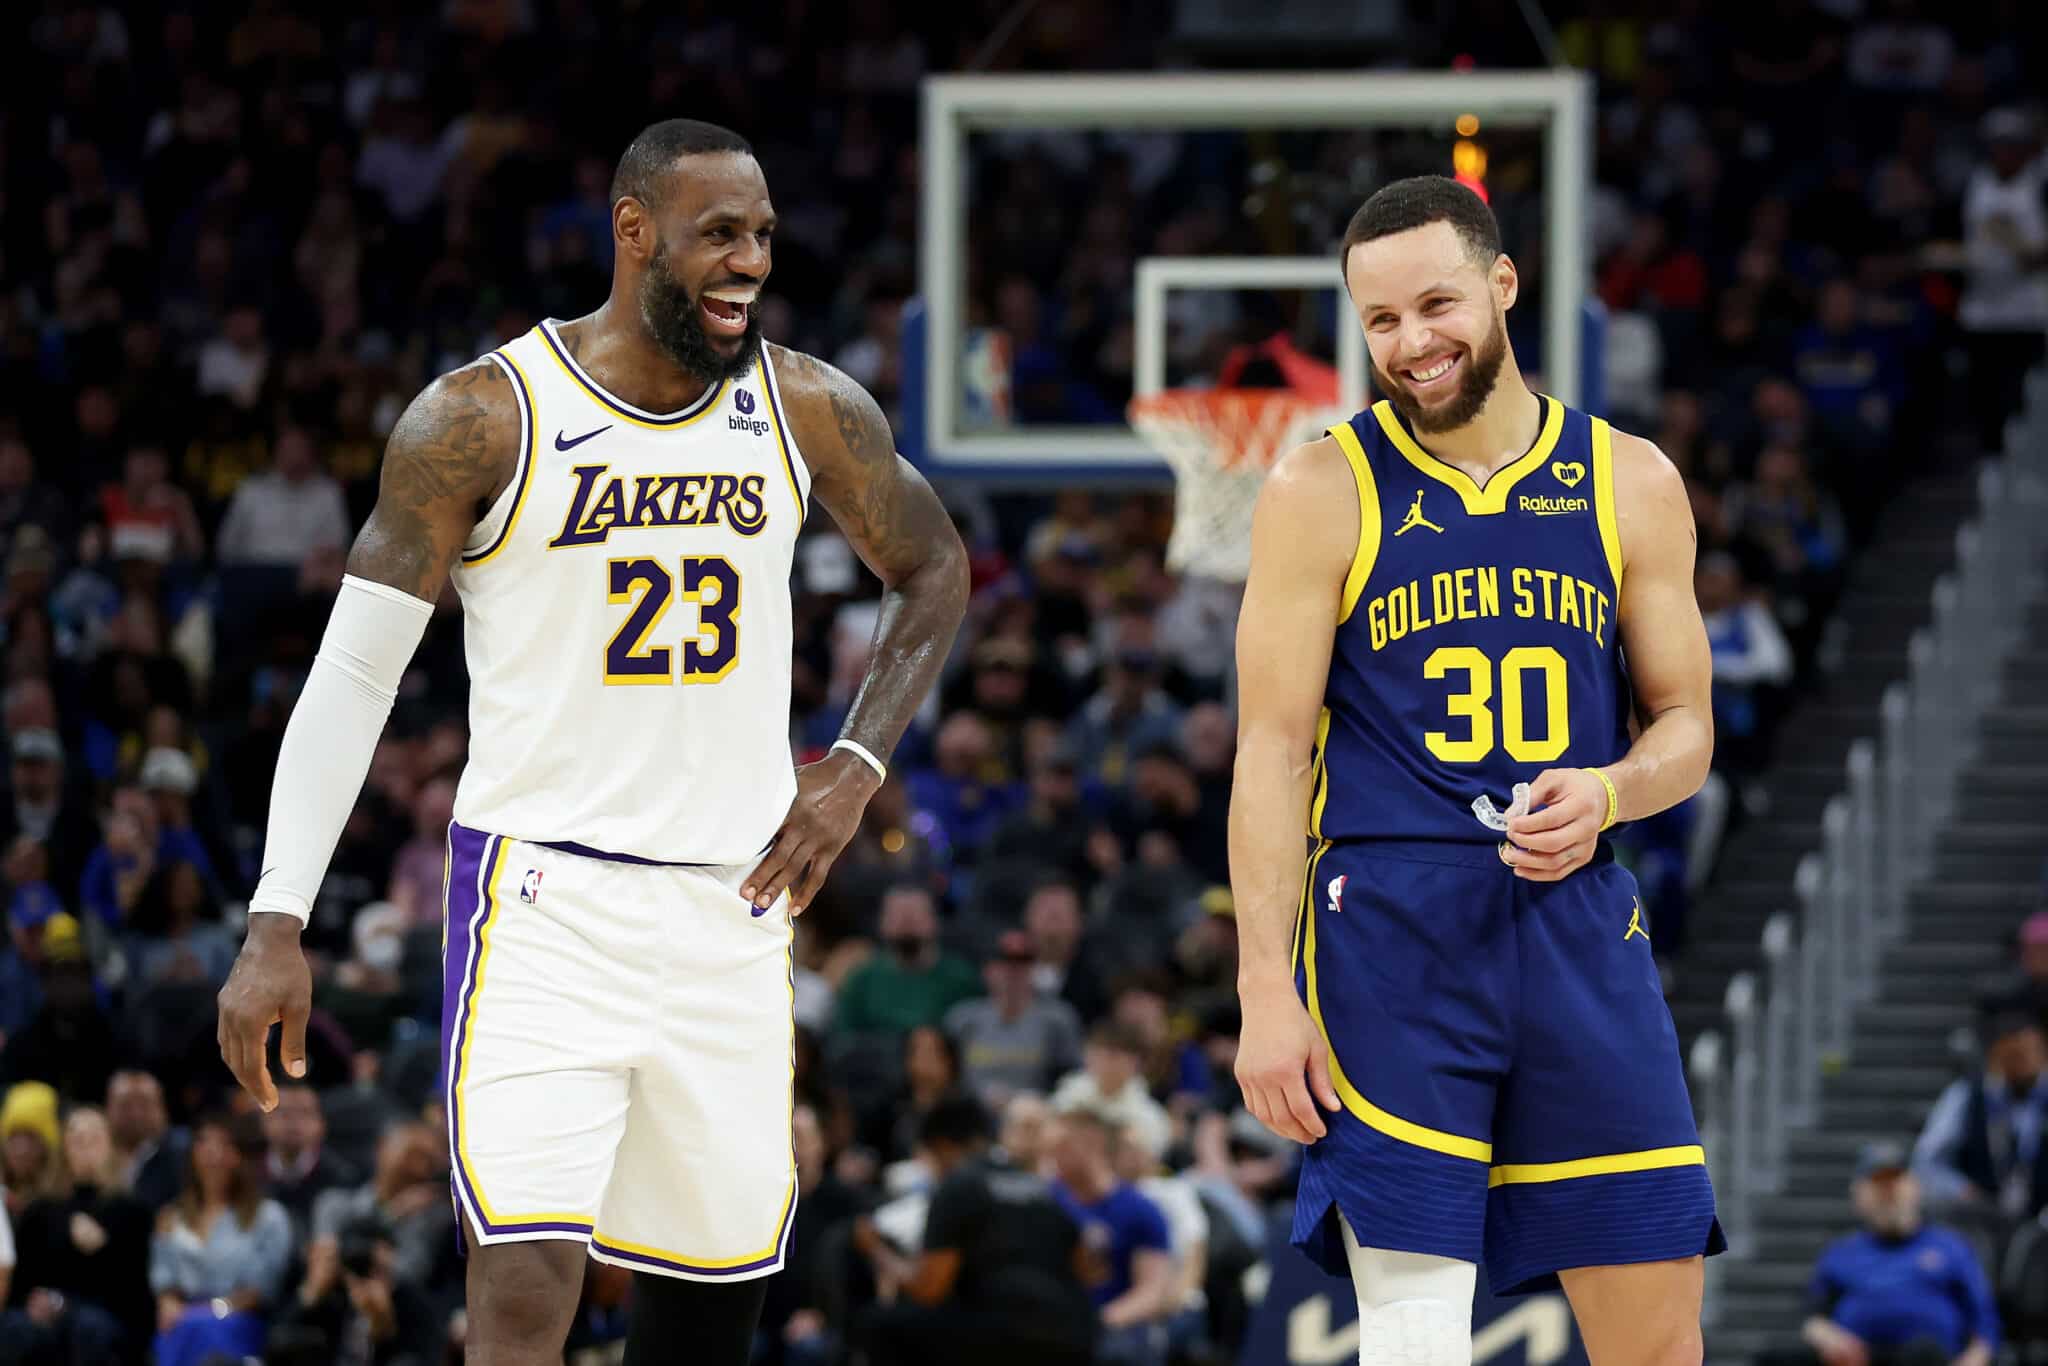 Both Steph Curry (Warriors) and LeBron James (Lakers) will feature in the NBA Play-In.